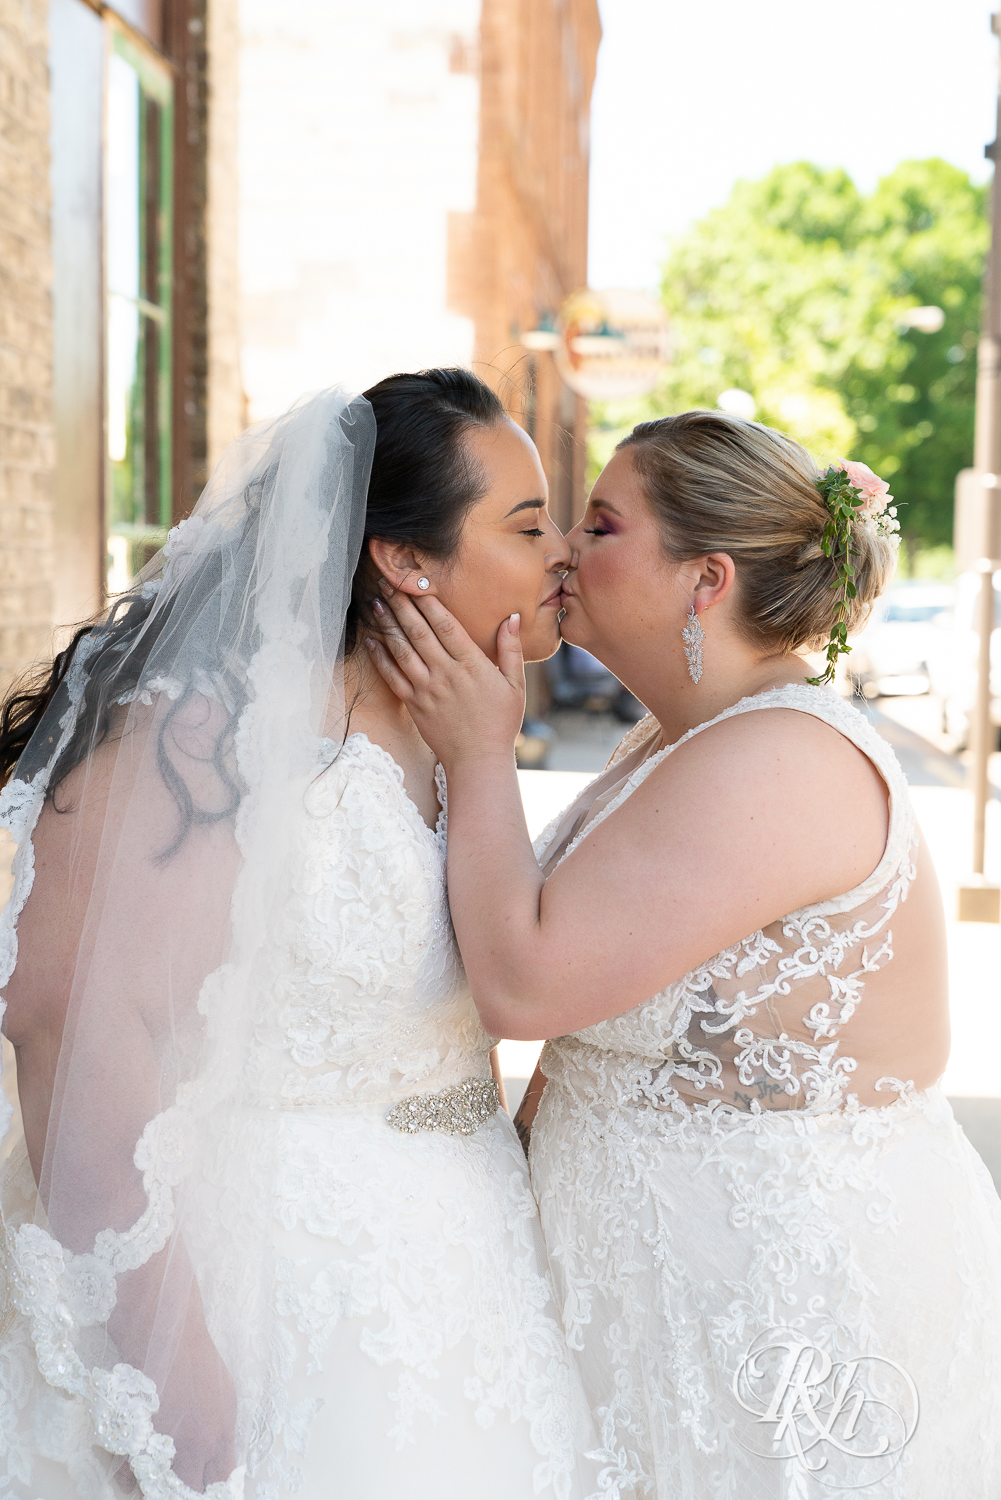 Lesbian brides kiss during wedding day at Cannon River Winery in Cannon Falls, Minnesota.